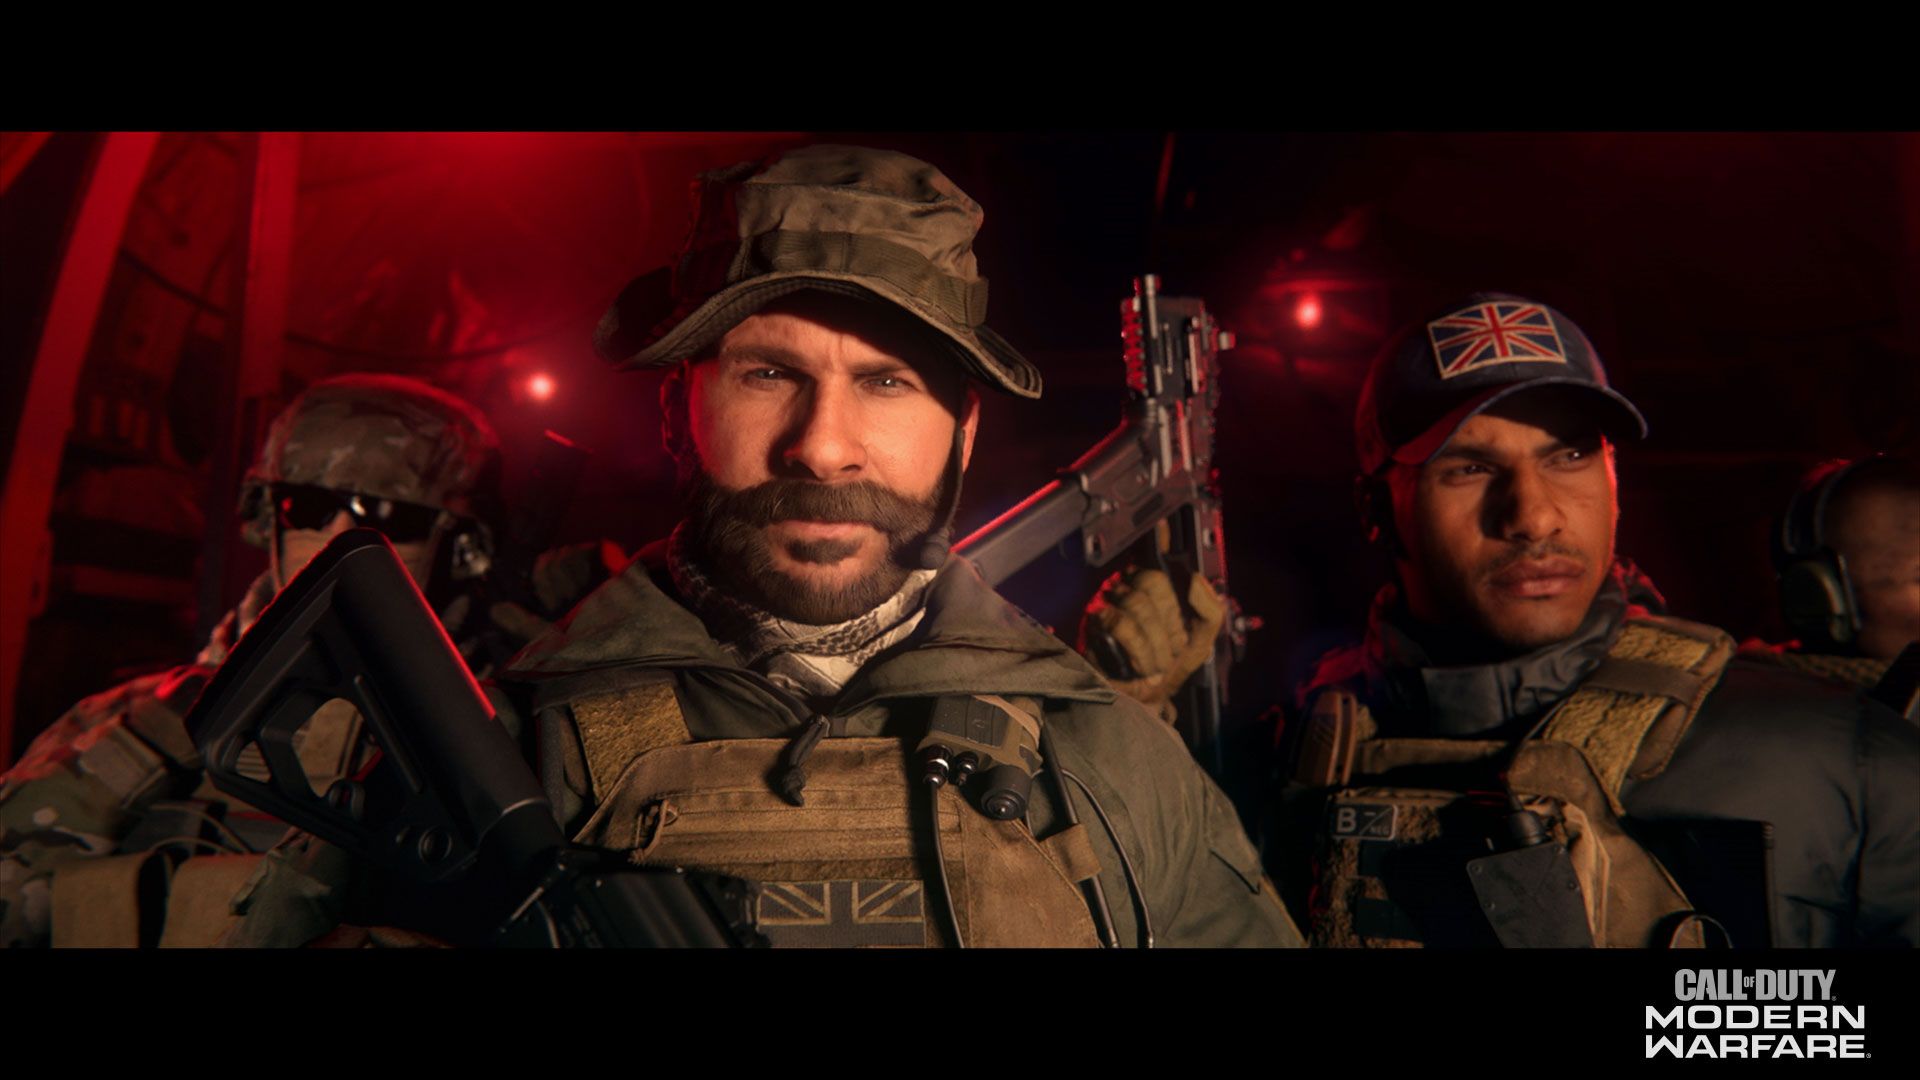 Captain Price and Gaz confirmed for Call of Duty: Modern Warfare